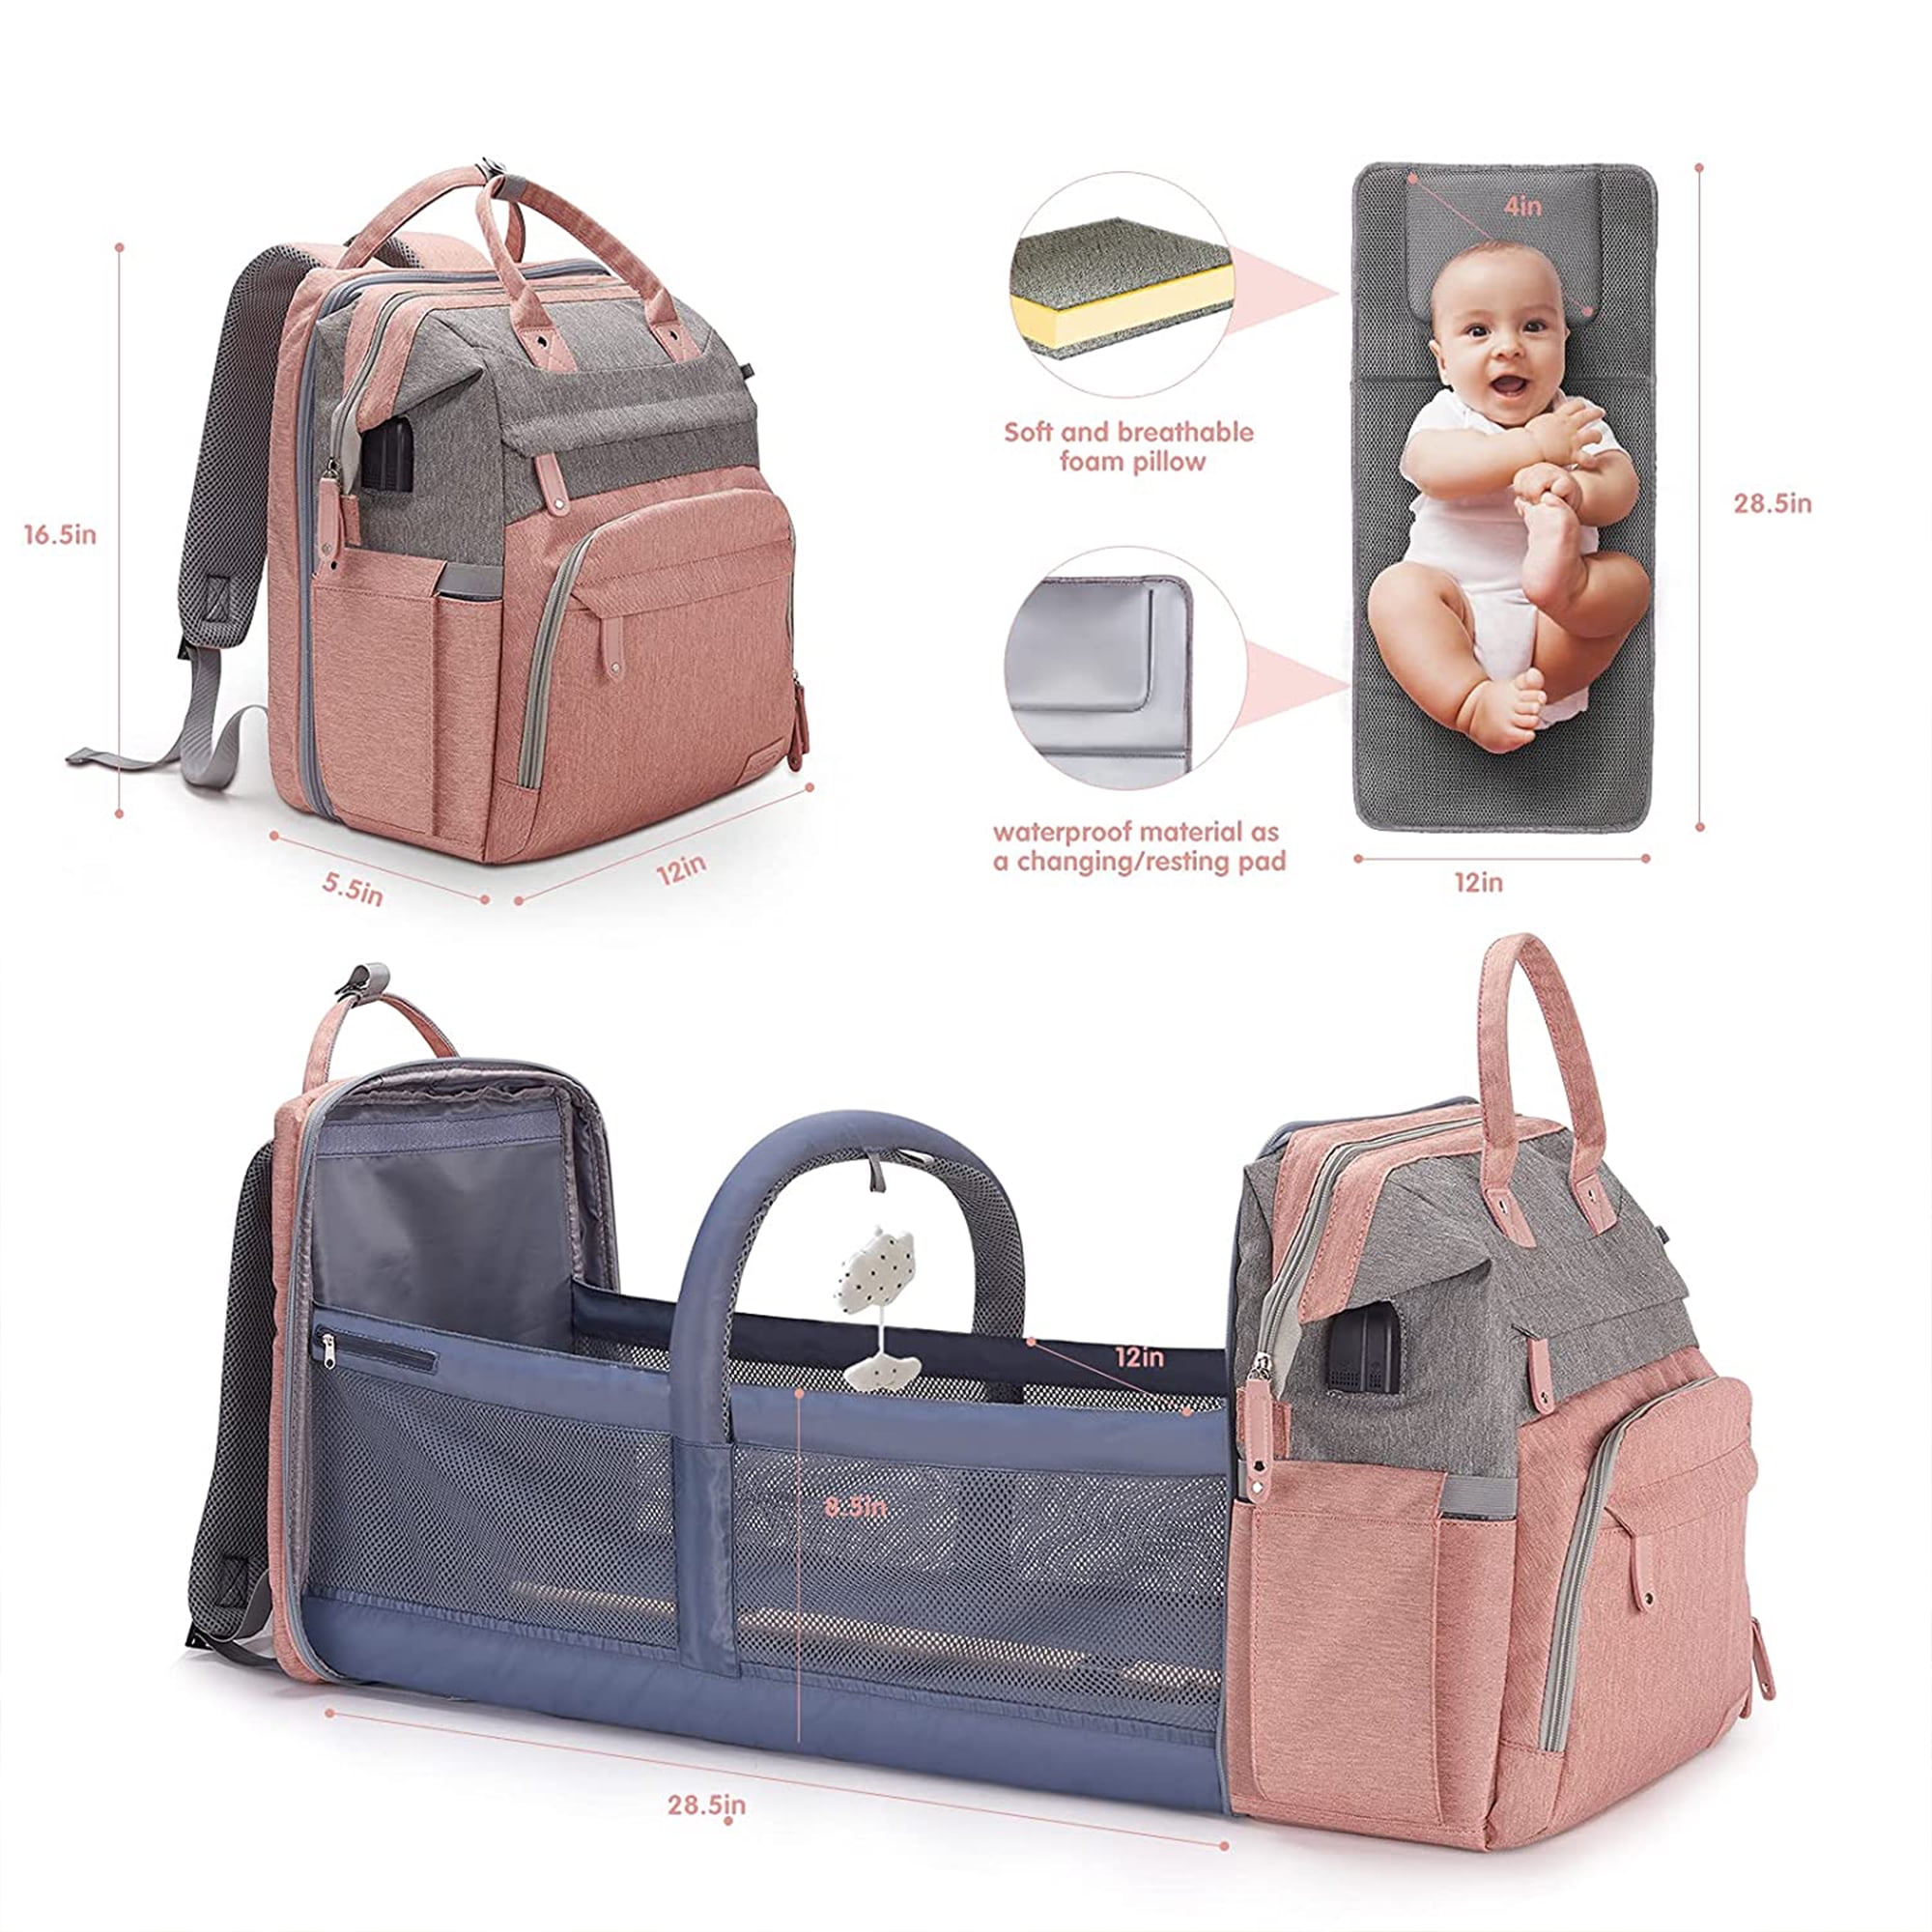 SNDMOR Baby Diaper Bag Backpack, Baby Diaper Bag with Changing Pad